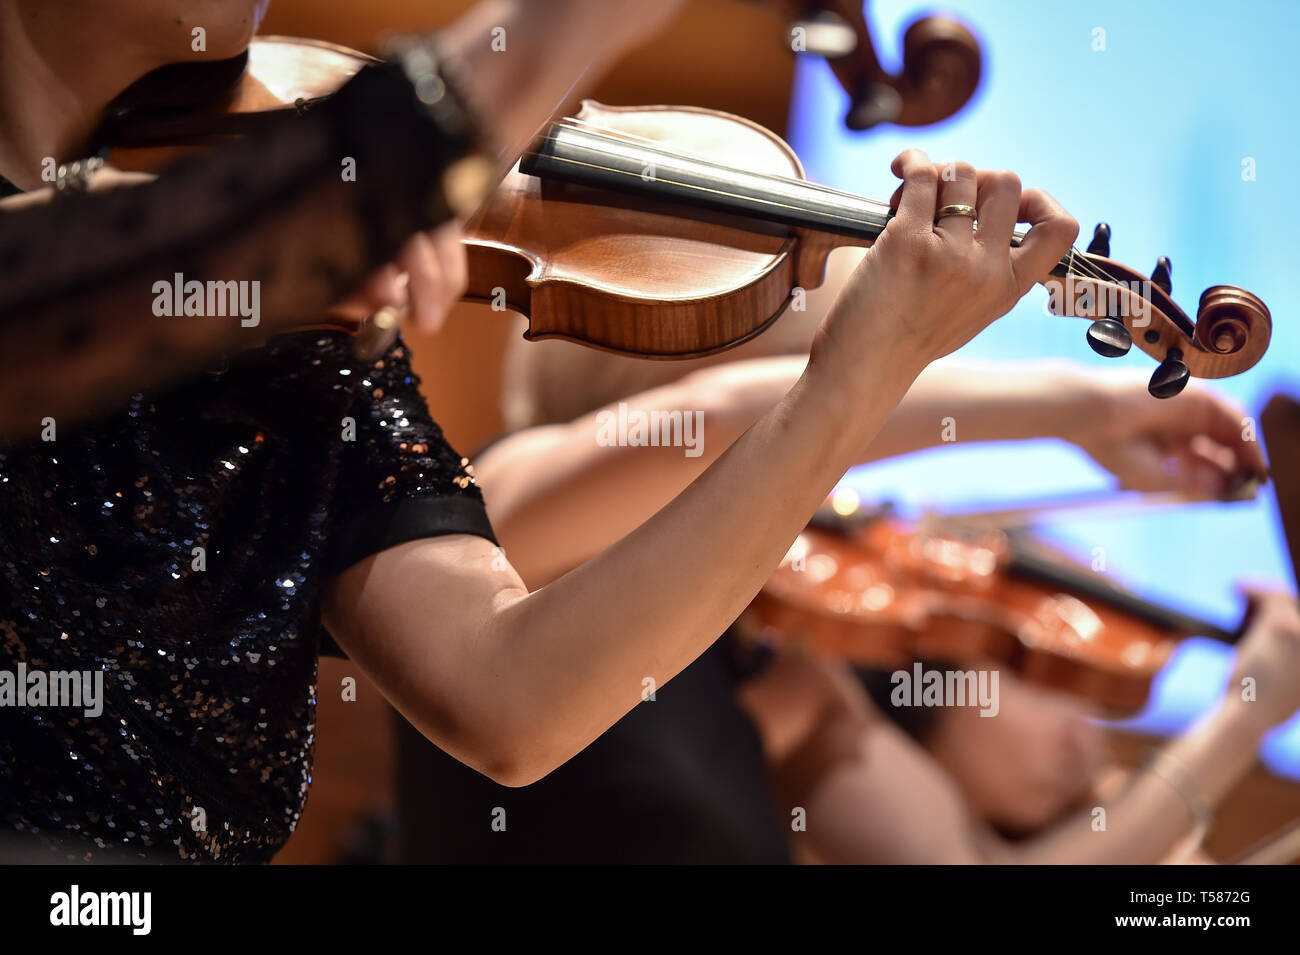 Violin players hand detail during philharmonic orchestra performance Stock Photo